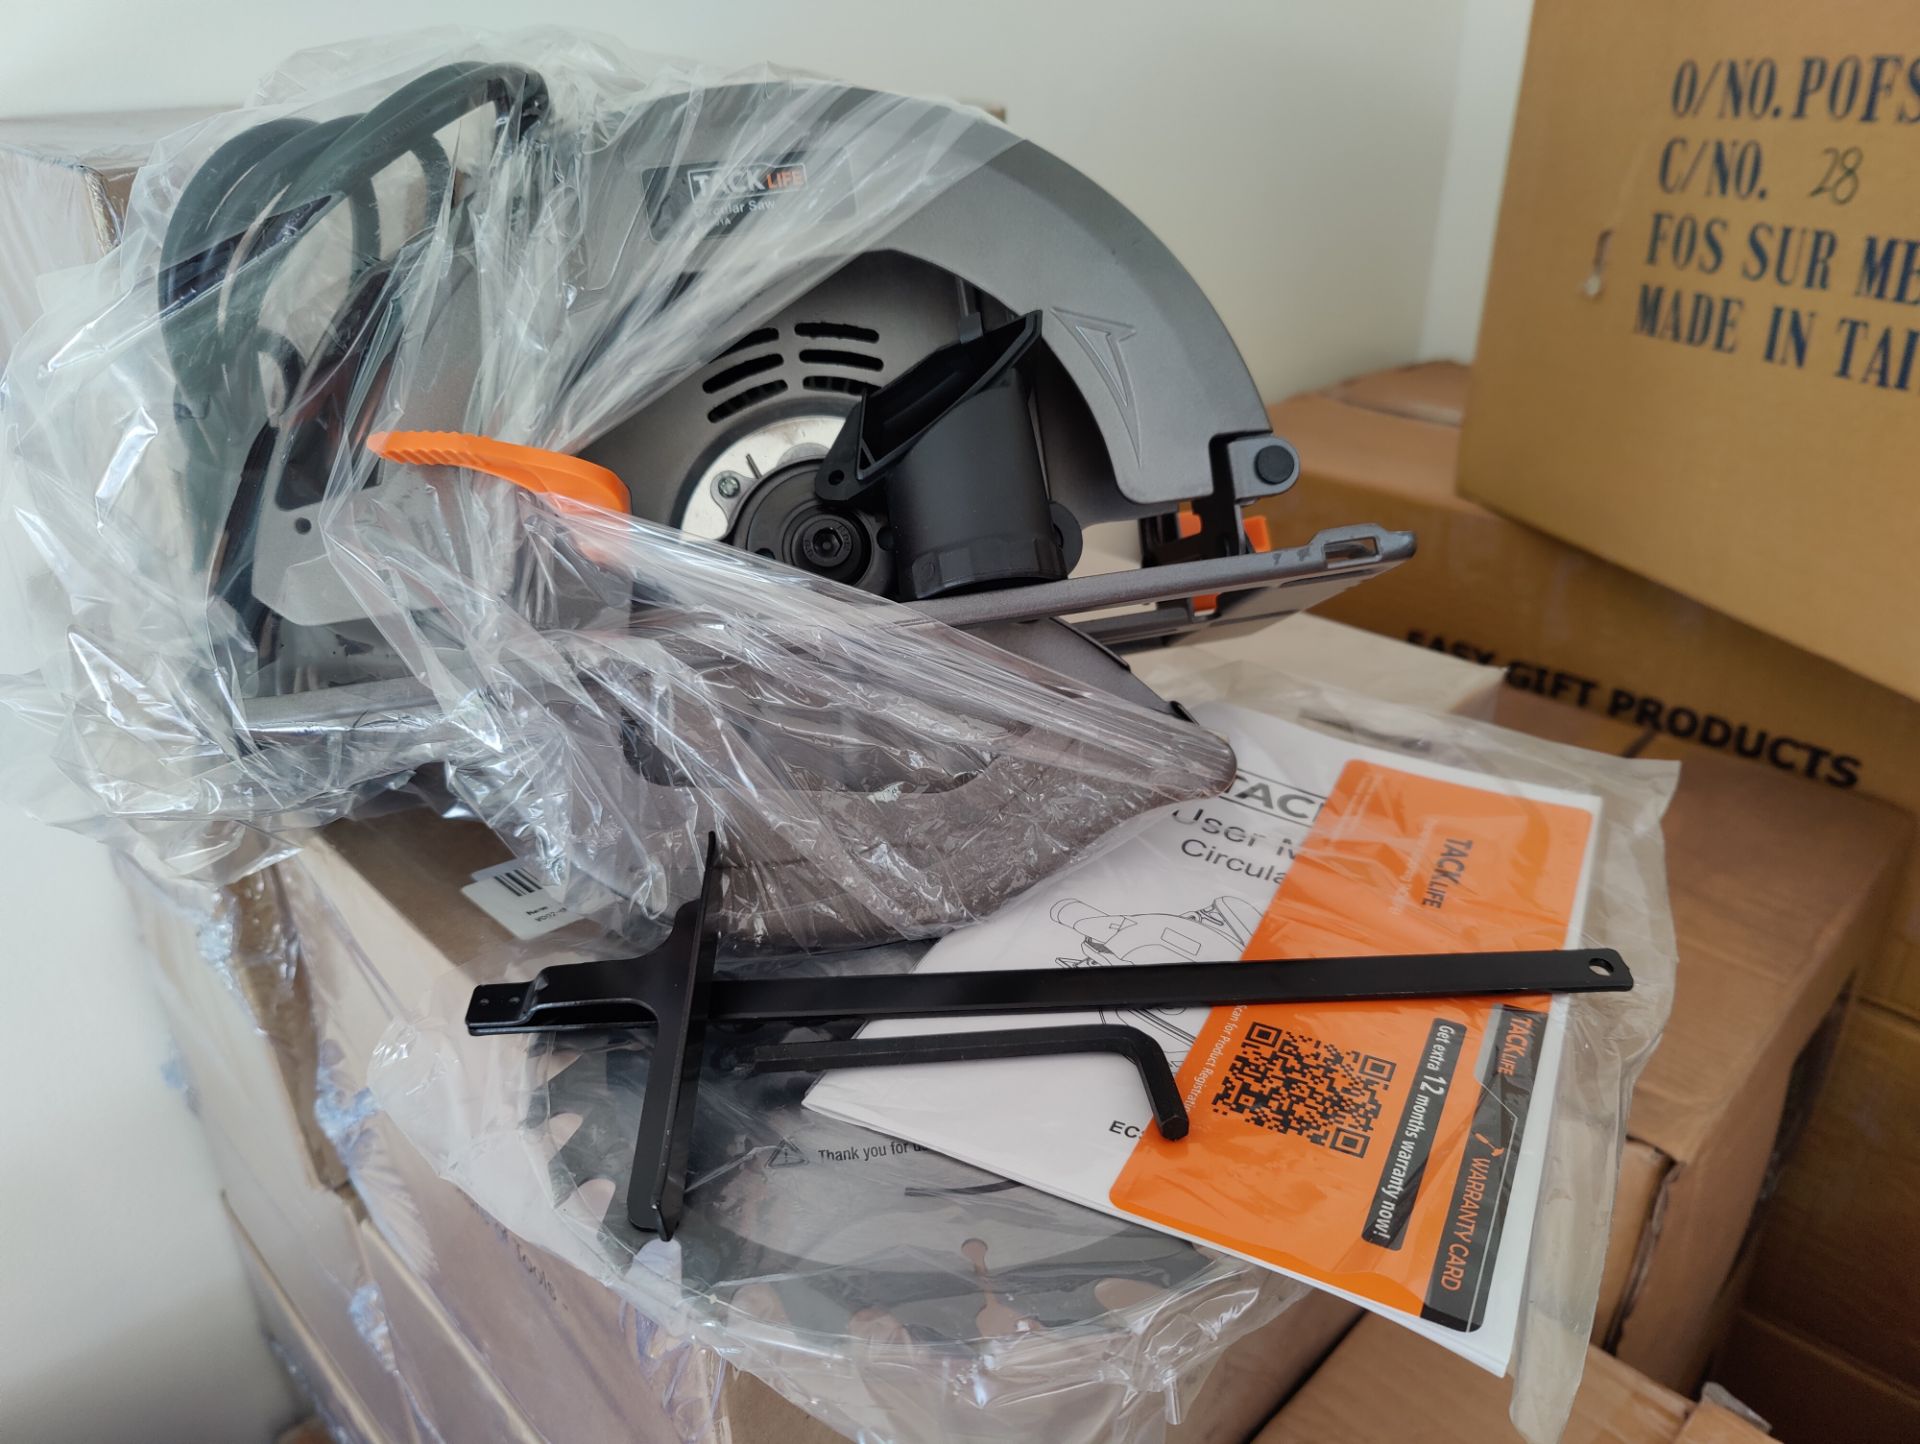 New Boxed Tacklife Electric Circular Saw,1500W, 5000 RPM With Bevel Cuts 2-3/5' - Bild 3 aus 4